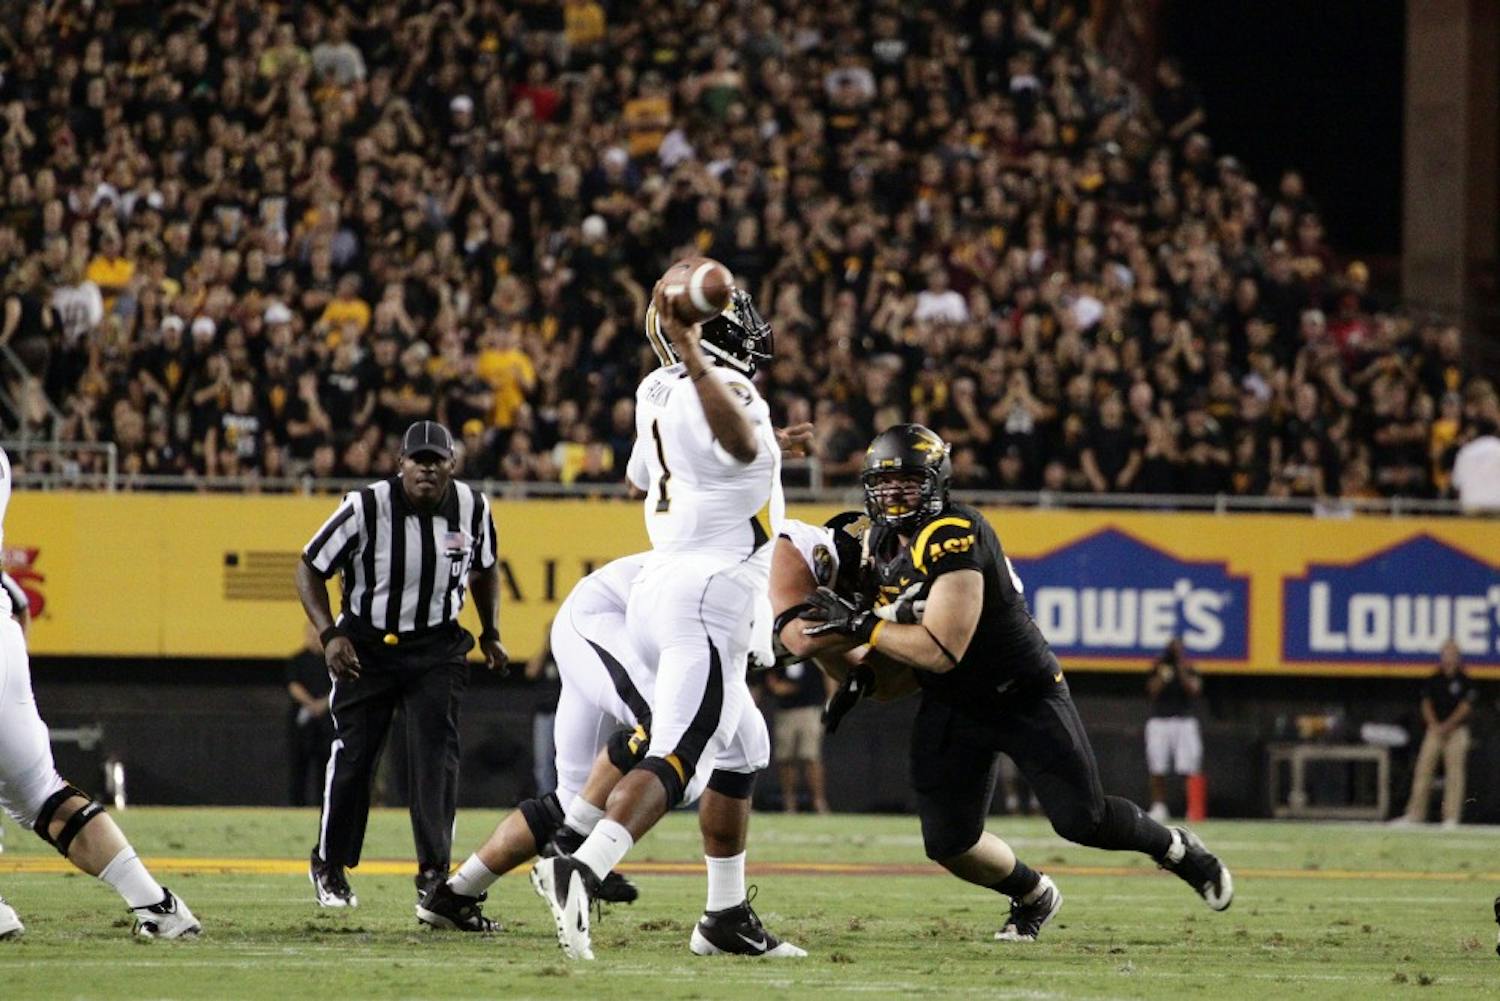 HEARTBREAKER: Missouri sophomore quarterback James Franklin makes a throw downfield during the Tigers' 37-30 overtime loss to ASU. The Tigers scored 14 fourth-quarter point to force OT. (Photo by Beth Easterbrook)